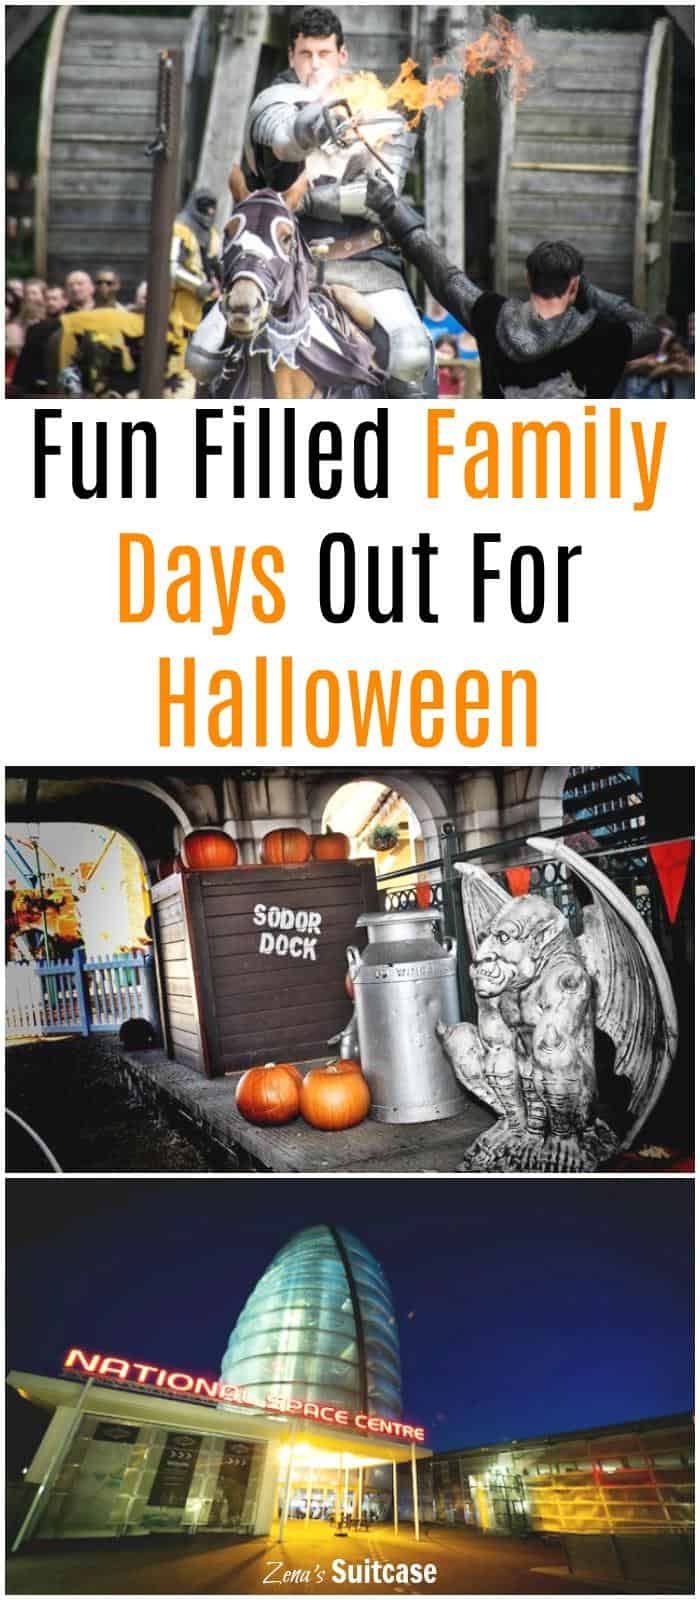 Fun filled family days out for Halloween this October. If you are looking for days out in the Midlands there's bound to be an idea here for autumn